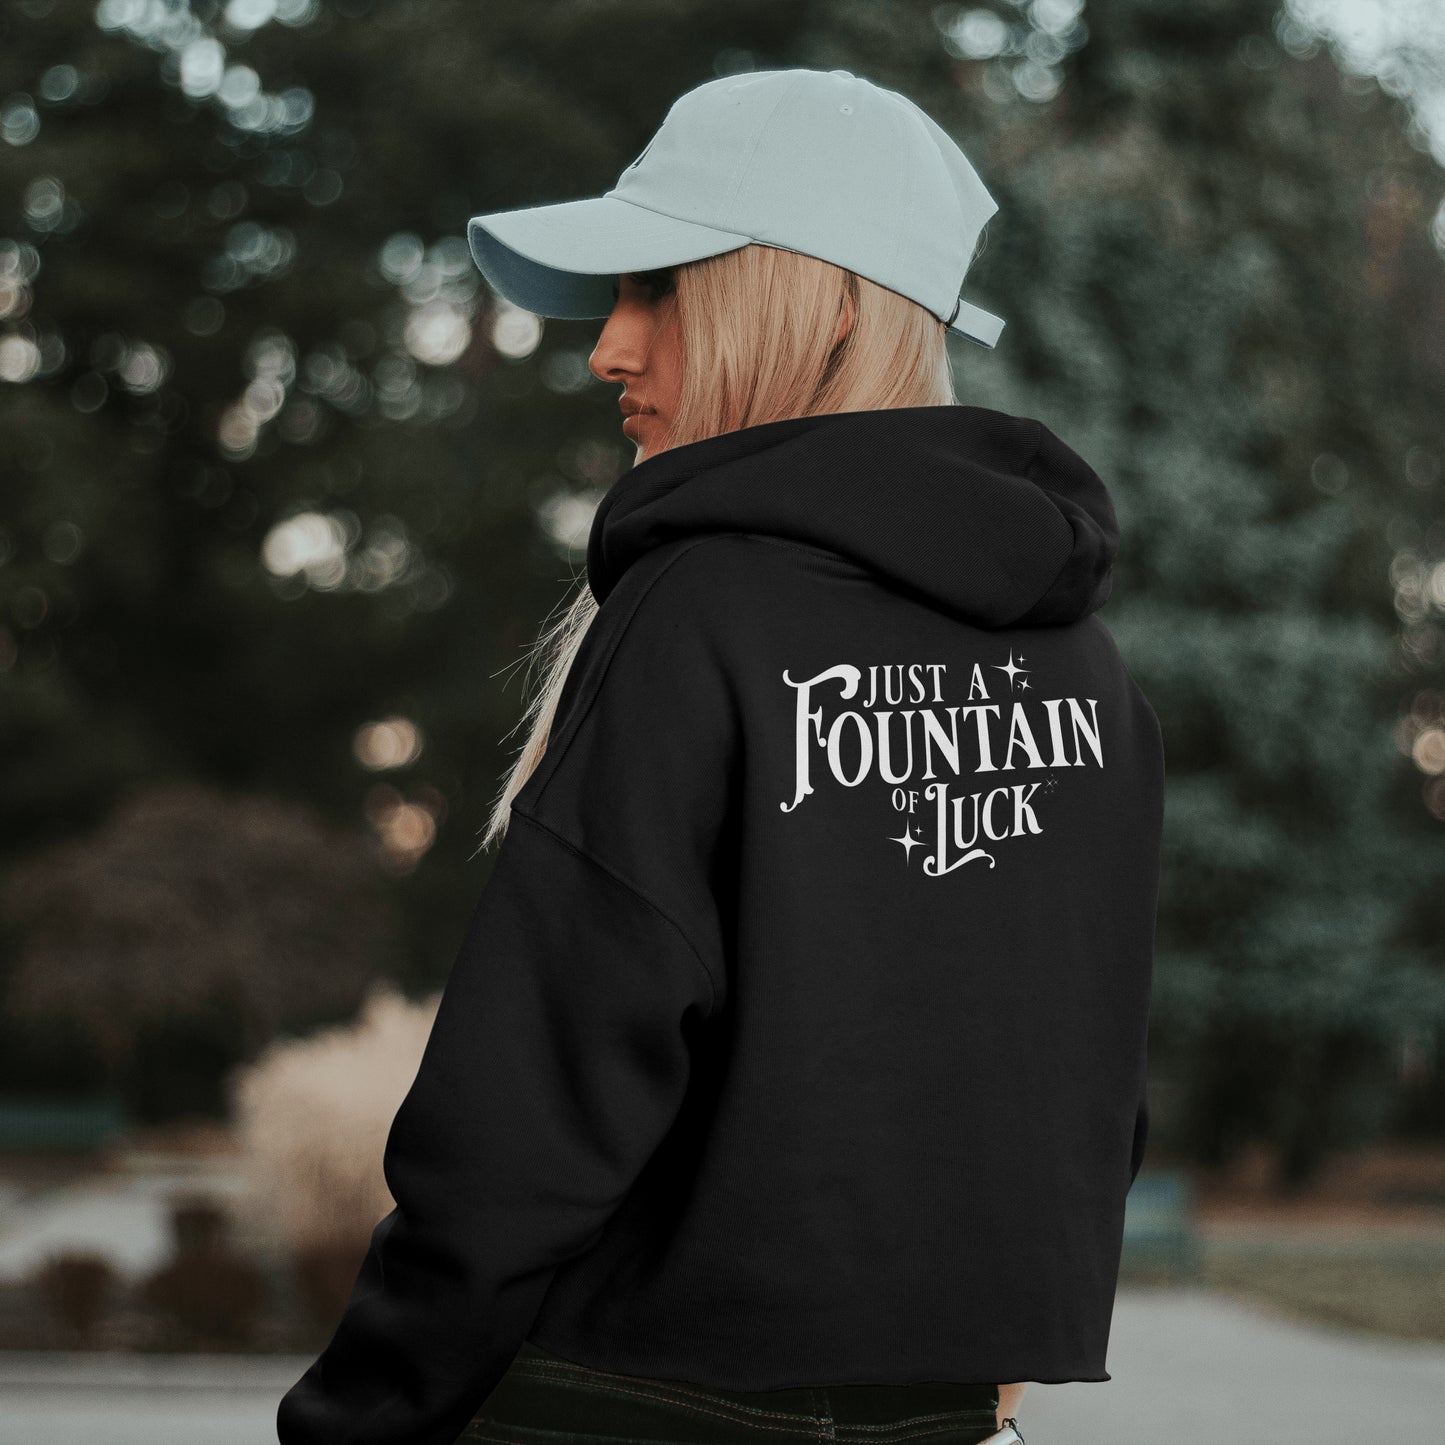 Just a Fountain of Luck - Chloe C. Penaranda - Officially Licensed - Hoodie - An Heir Comes to Rise - AHCTR